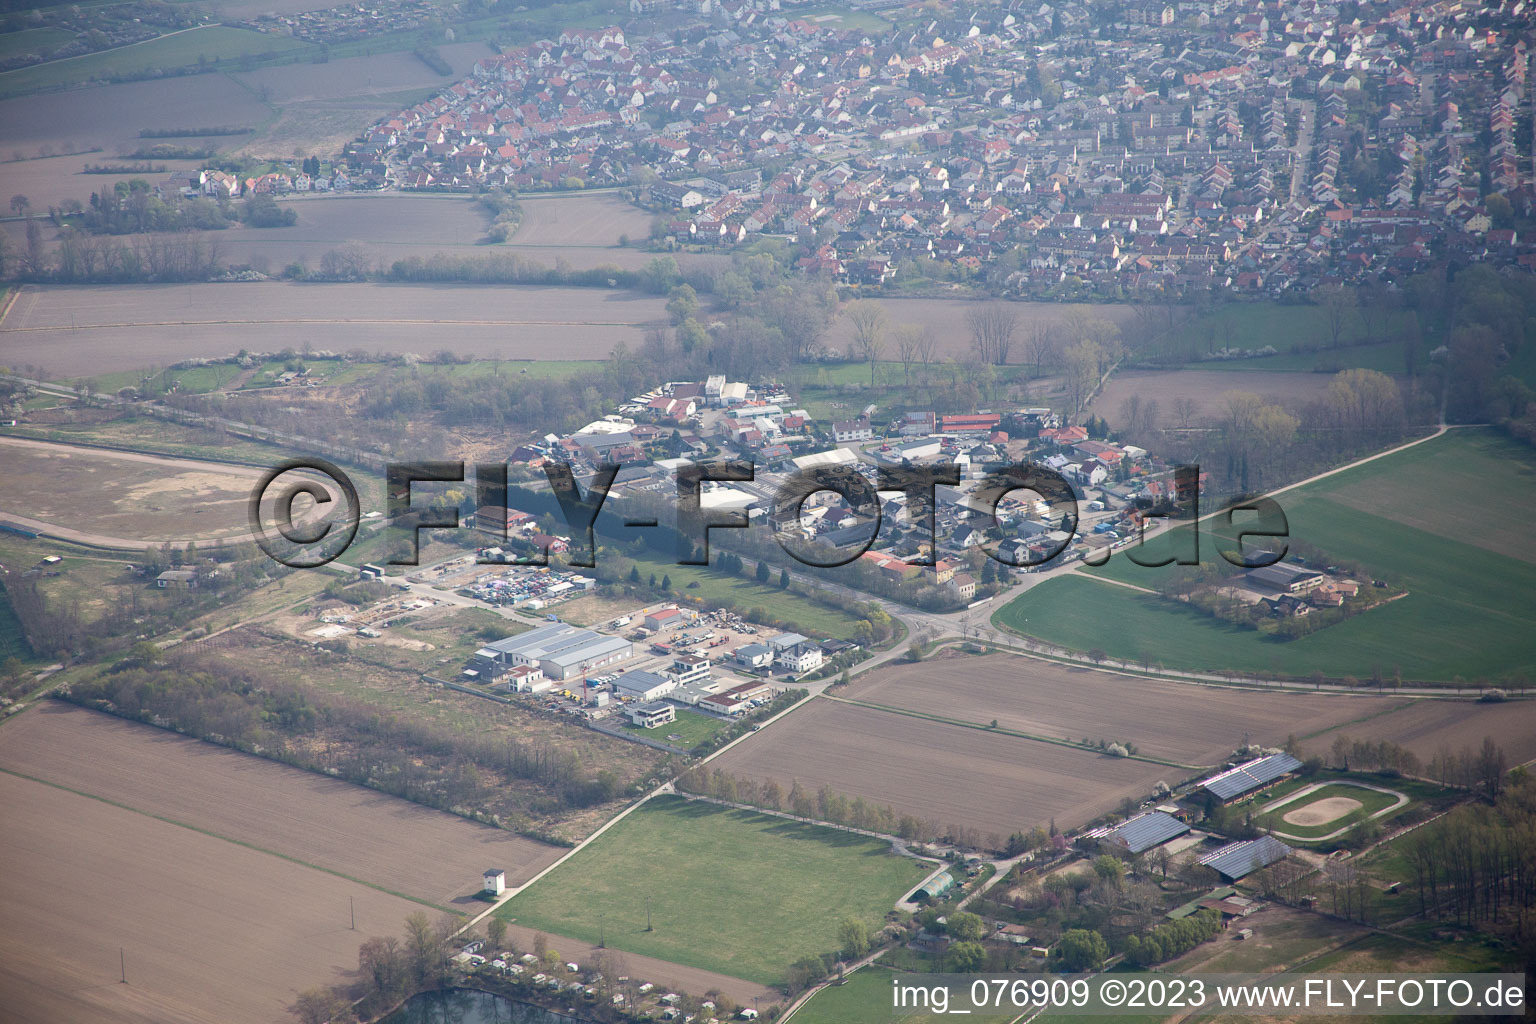 Aerial photograpy of Altrip in the state Rhineland-Palatinate, Germany